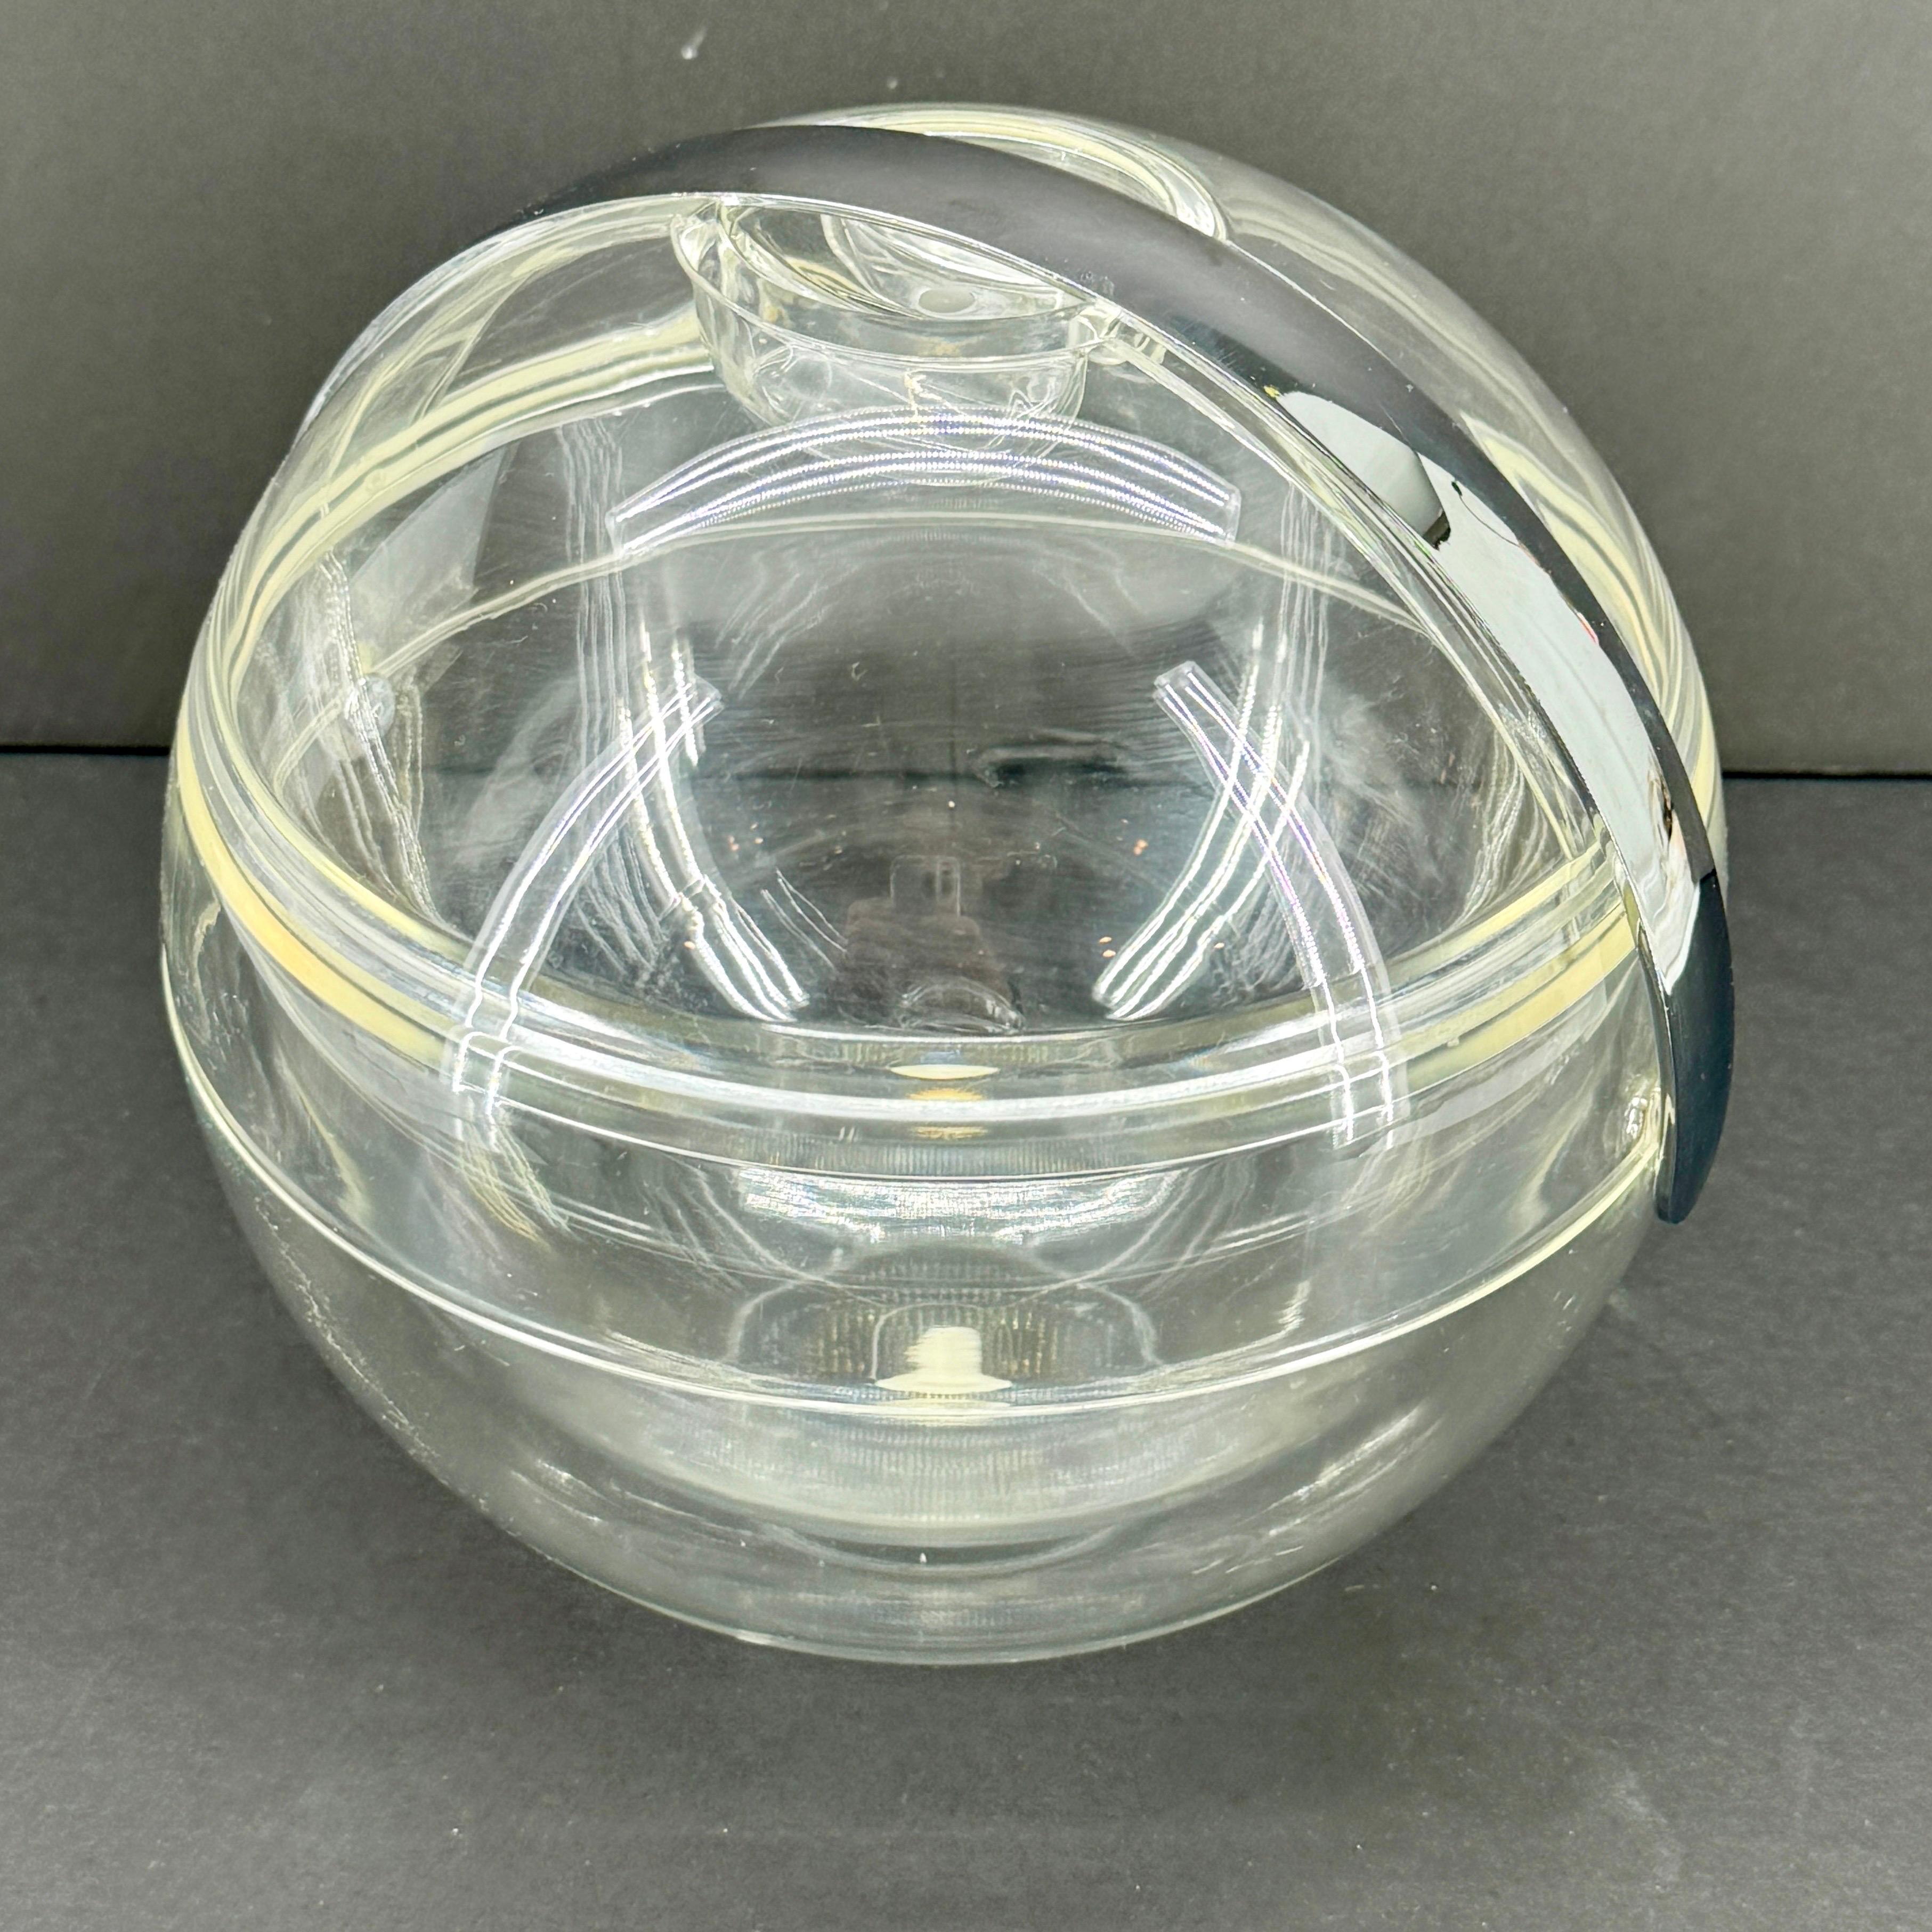 Mid-Century Modern Italian Space Age Lucite Ice Bucket Designed by Paolo Tilche for Guzzini  For Sale